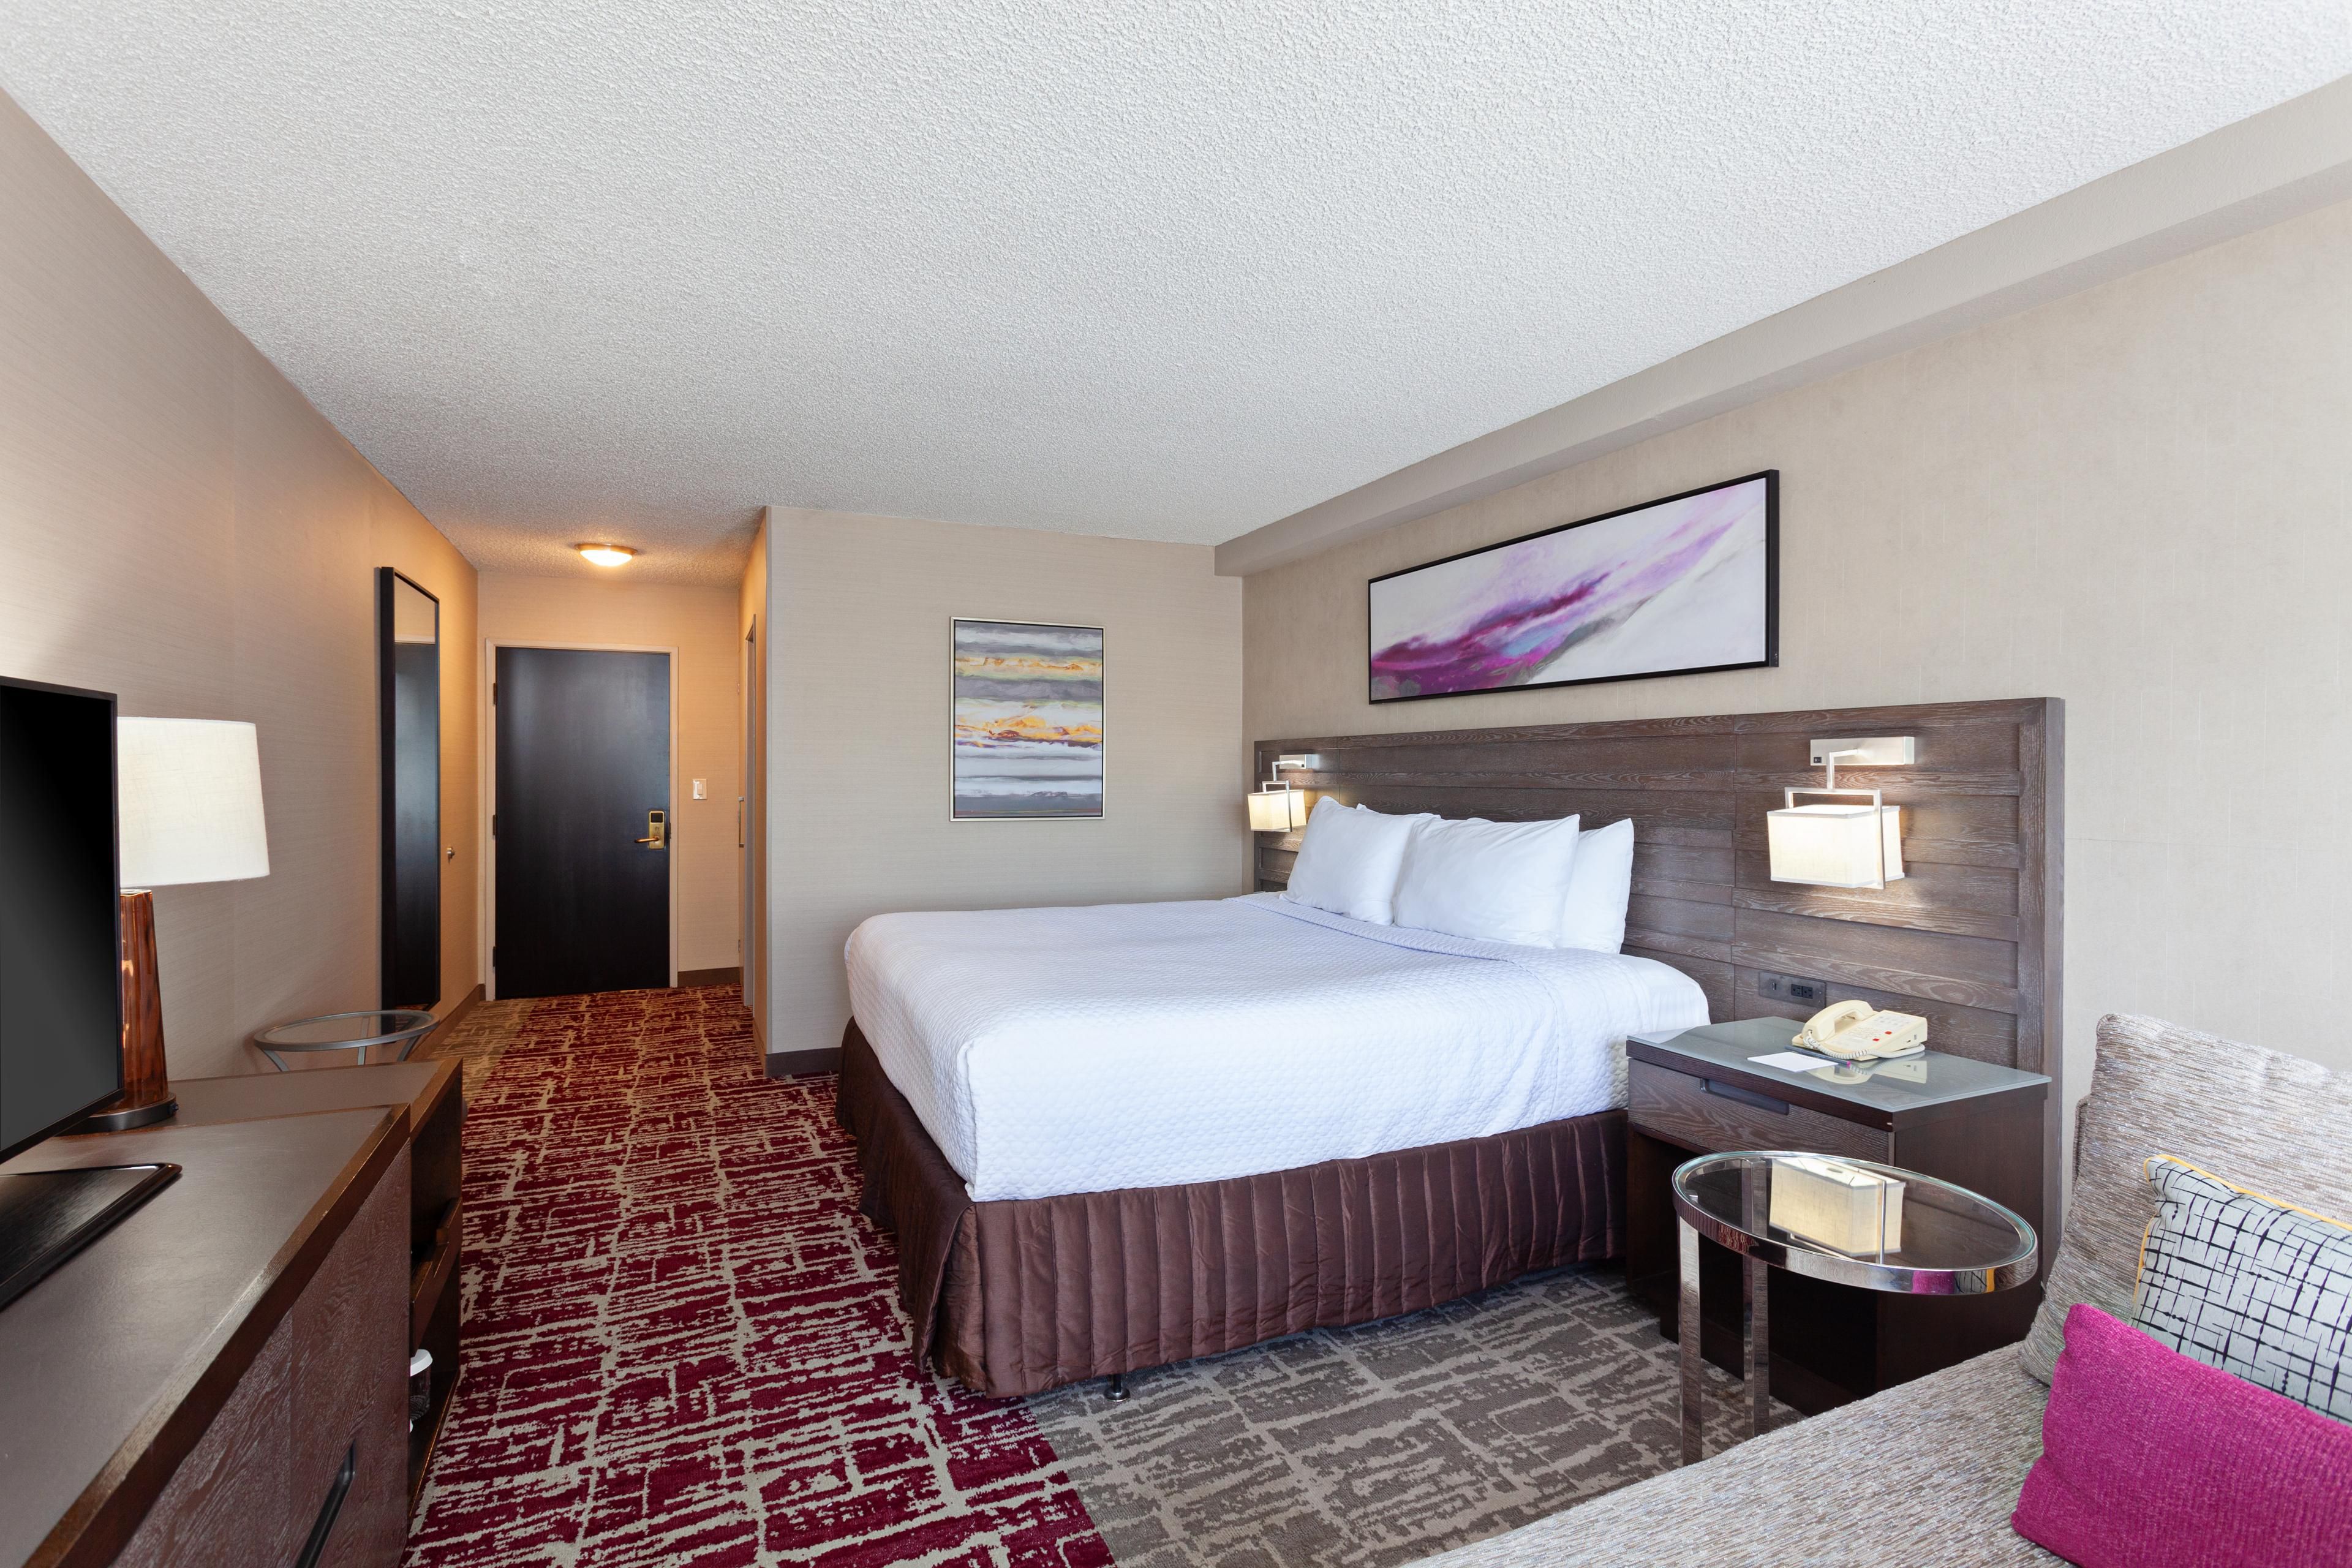 Make yourself at home in our King Bed Executive Room